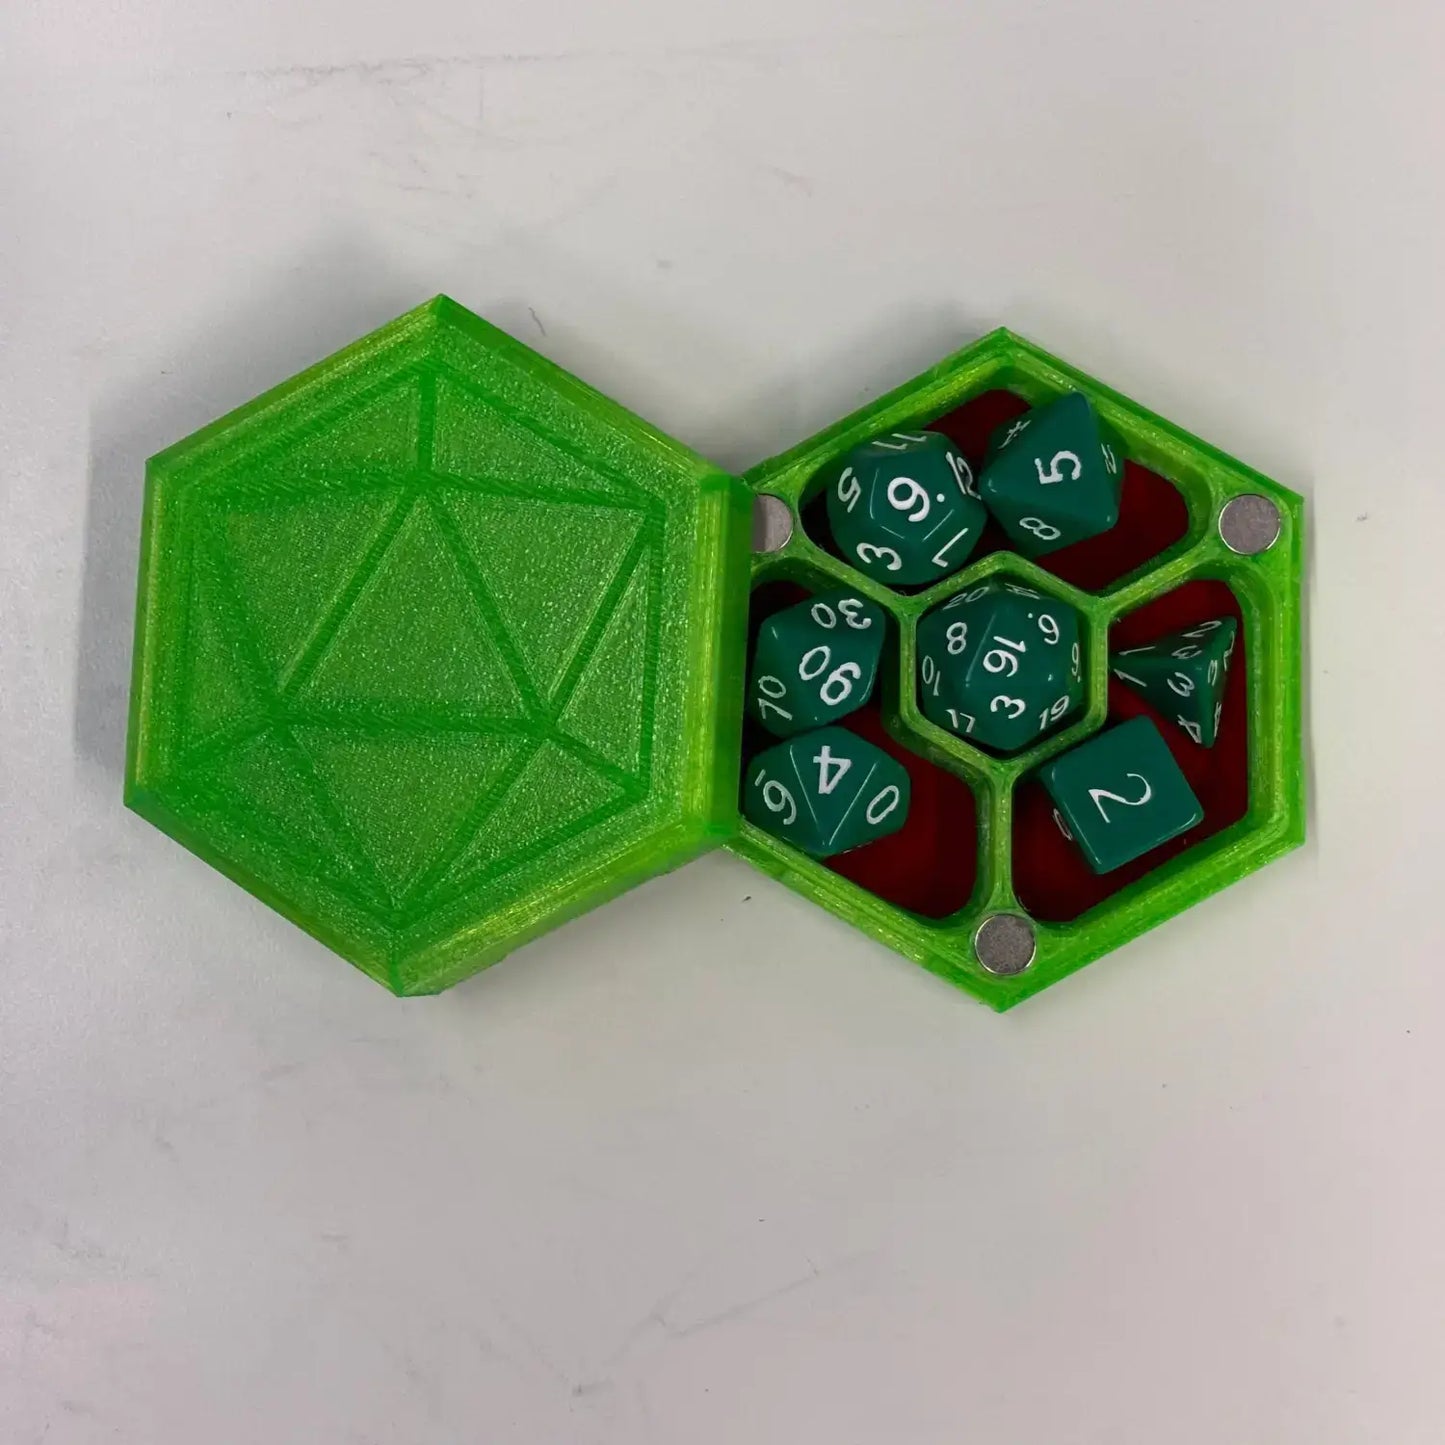 Felt lined Dice Box for DnD or table top games - Green Case